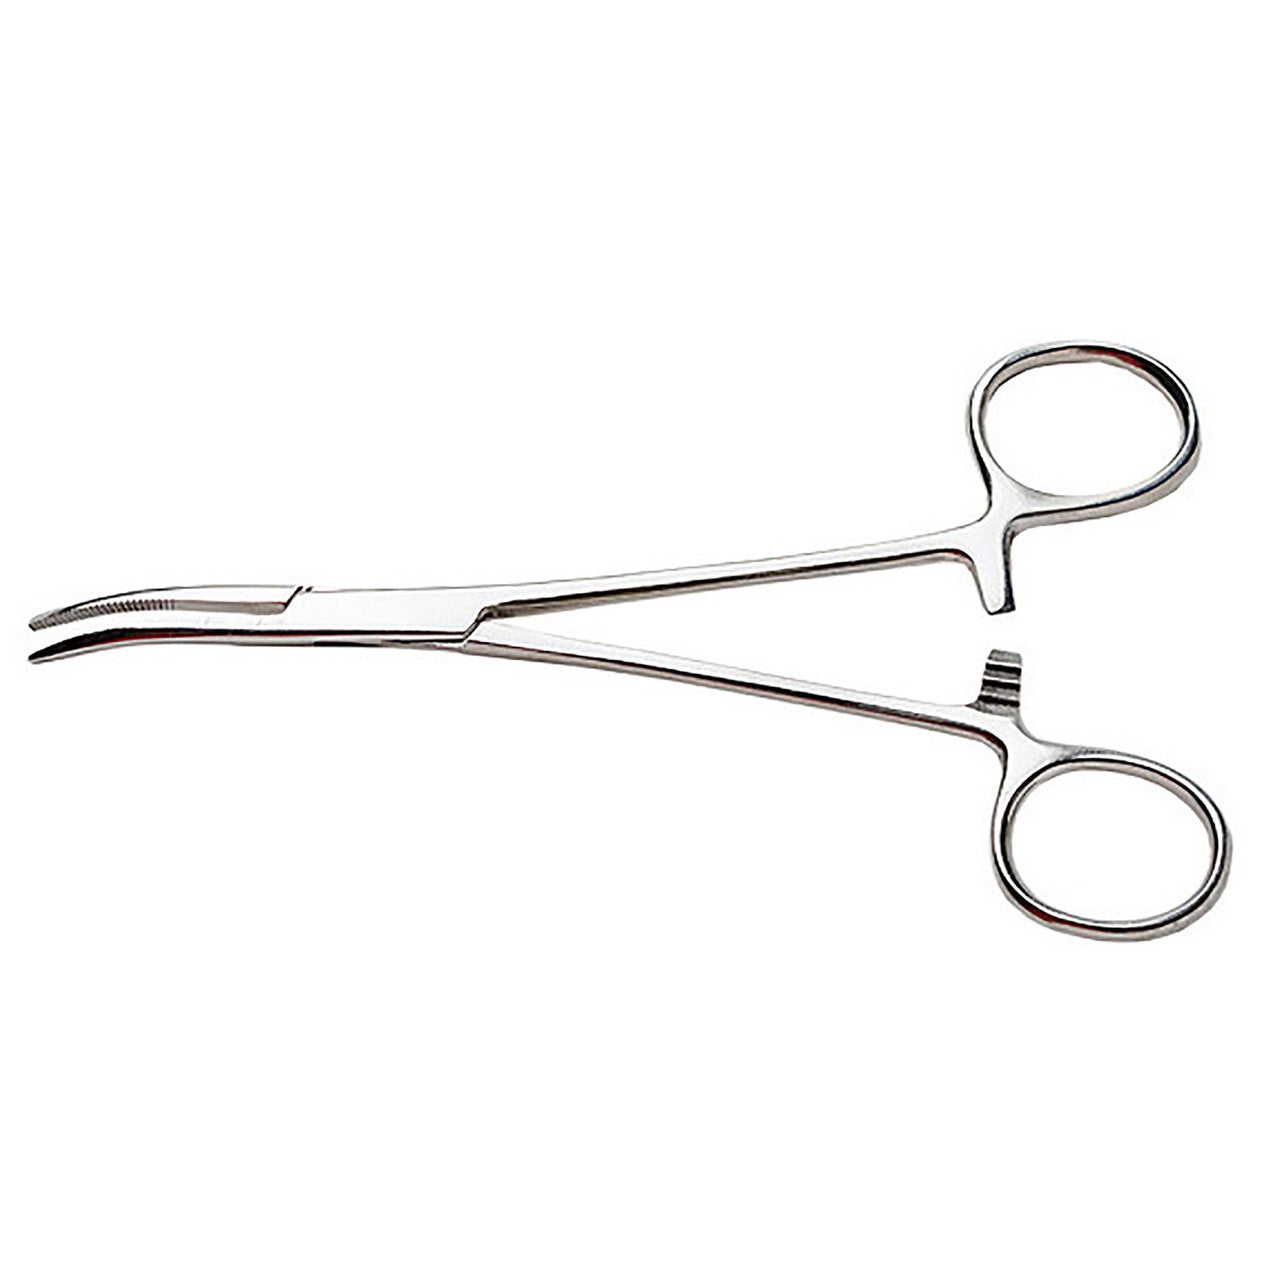 Hemostat 7.5" Curved by Excel